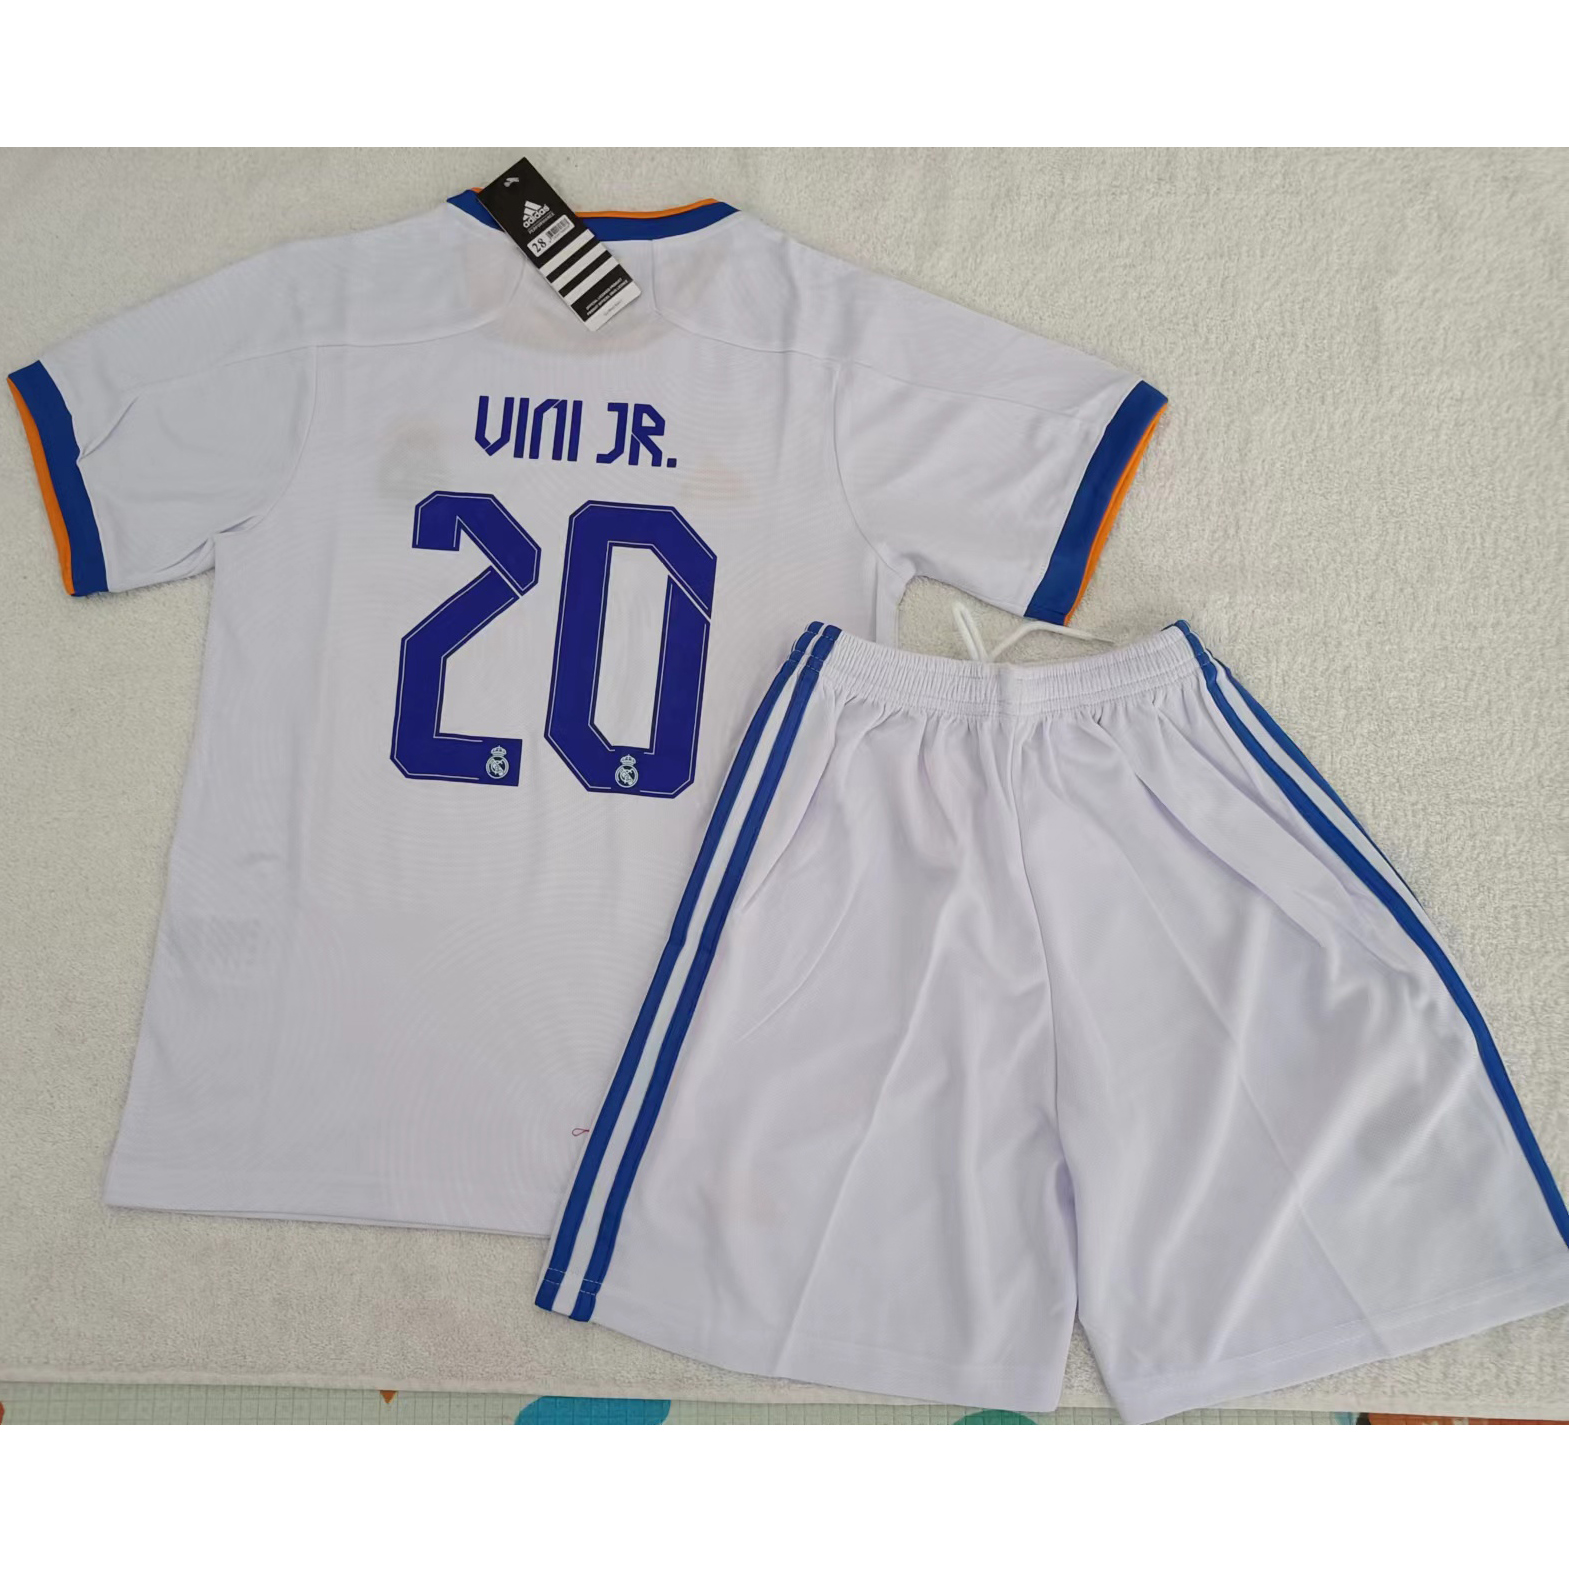 22106 Max Maillot Real Madrid Enfant UINI JR. 20 Blanc Taille28